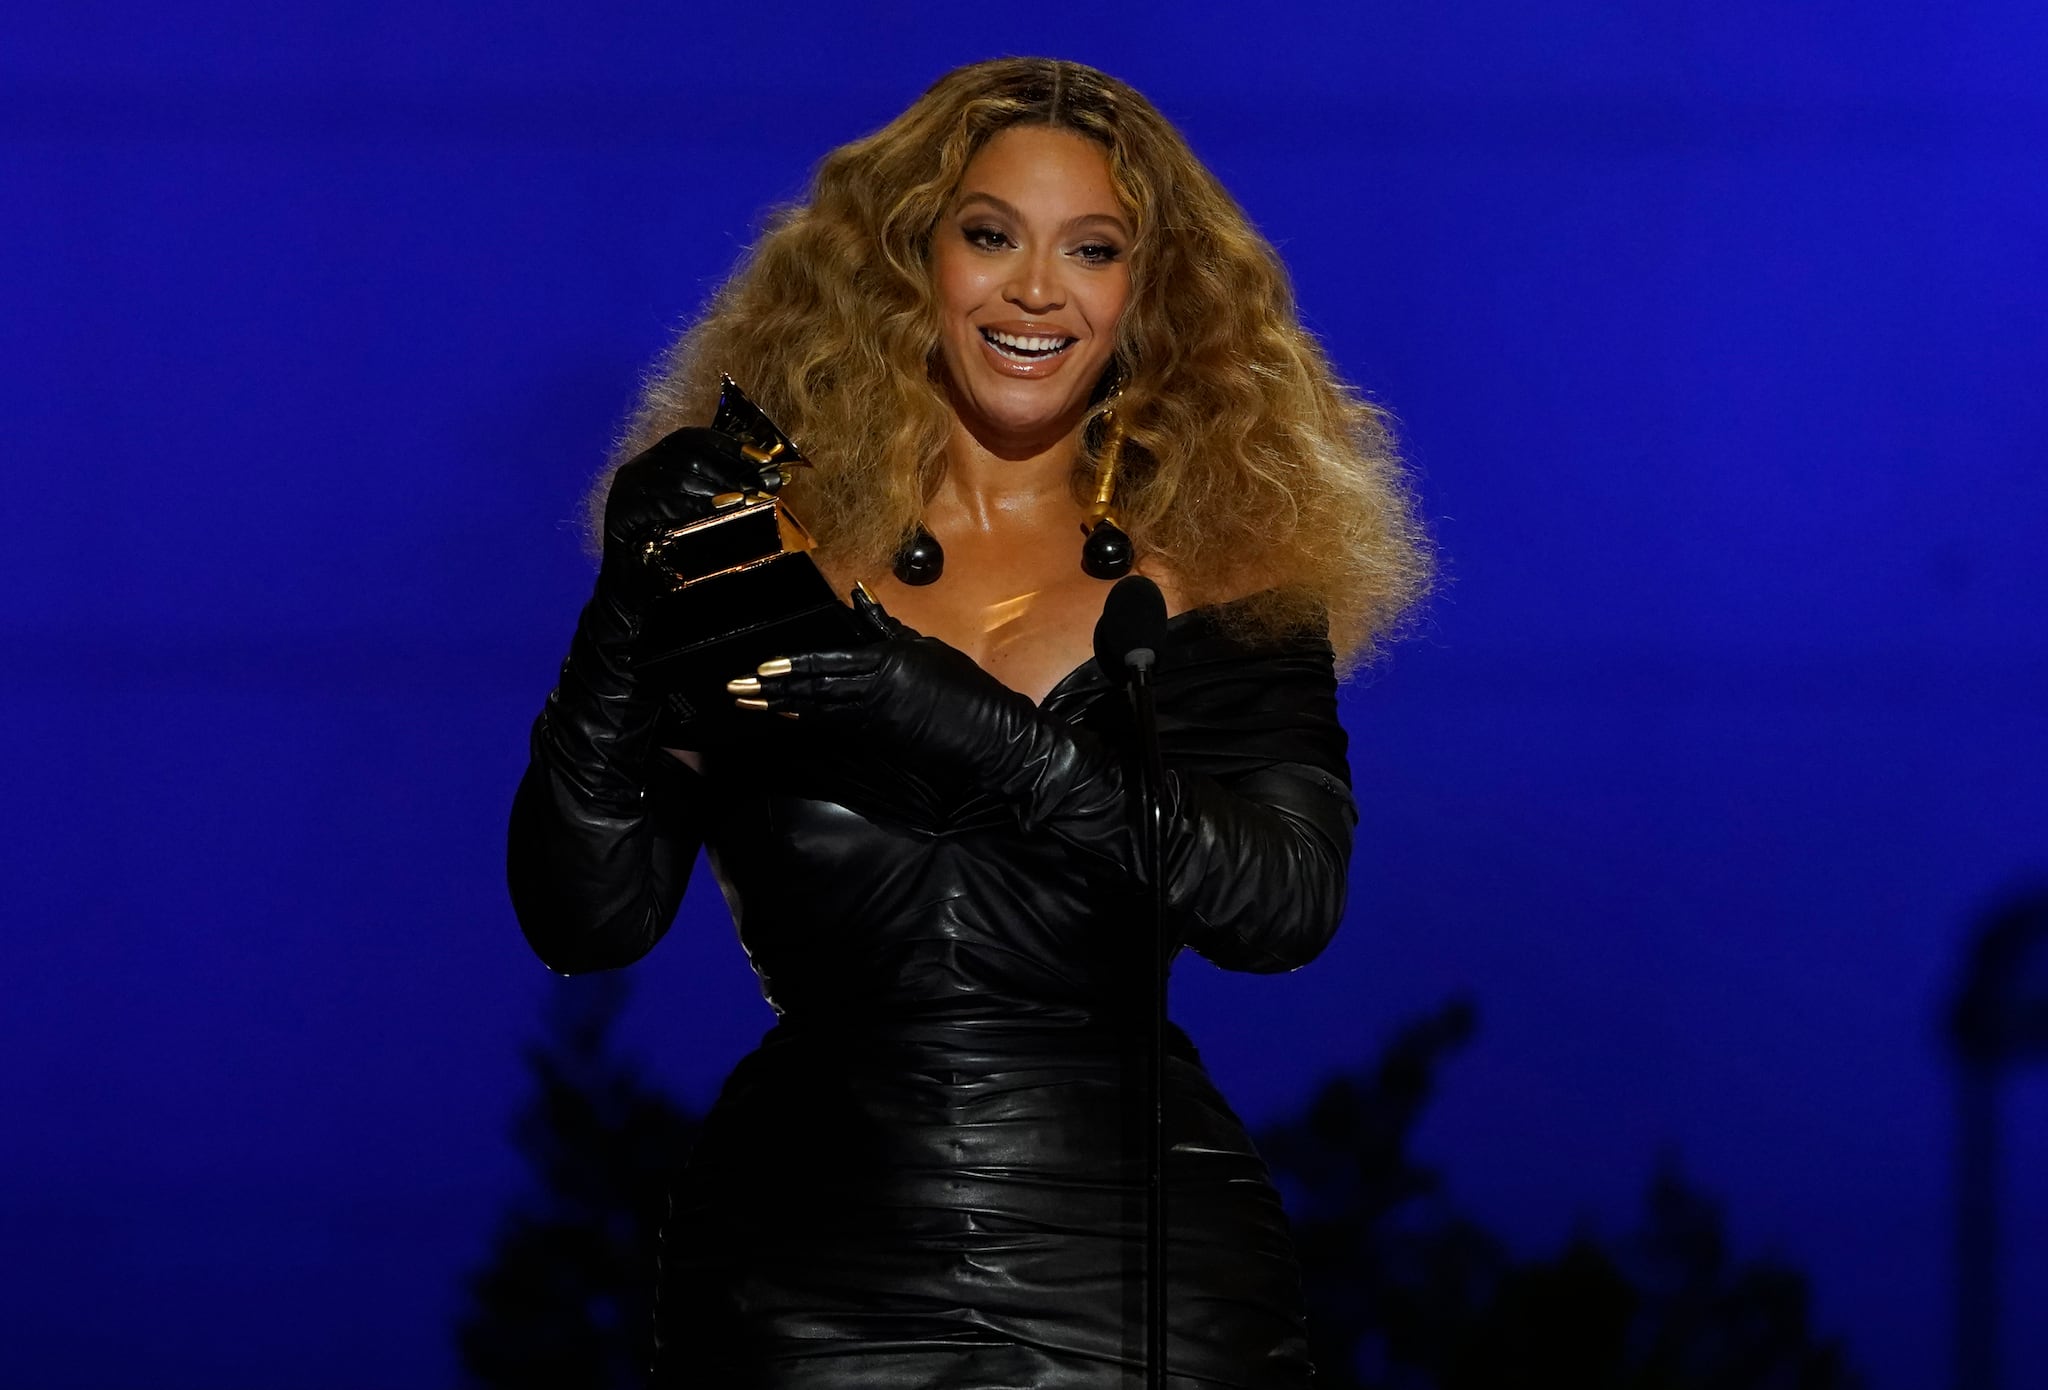 Beyonce accepts the award for best R&B performance for "Black Parade" at the 63rd annual Grammy Awards at the Los Angeles Convention Center on Sunday, March 14, 2021. (AP Photo/Chris Pizzello)